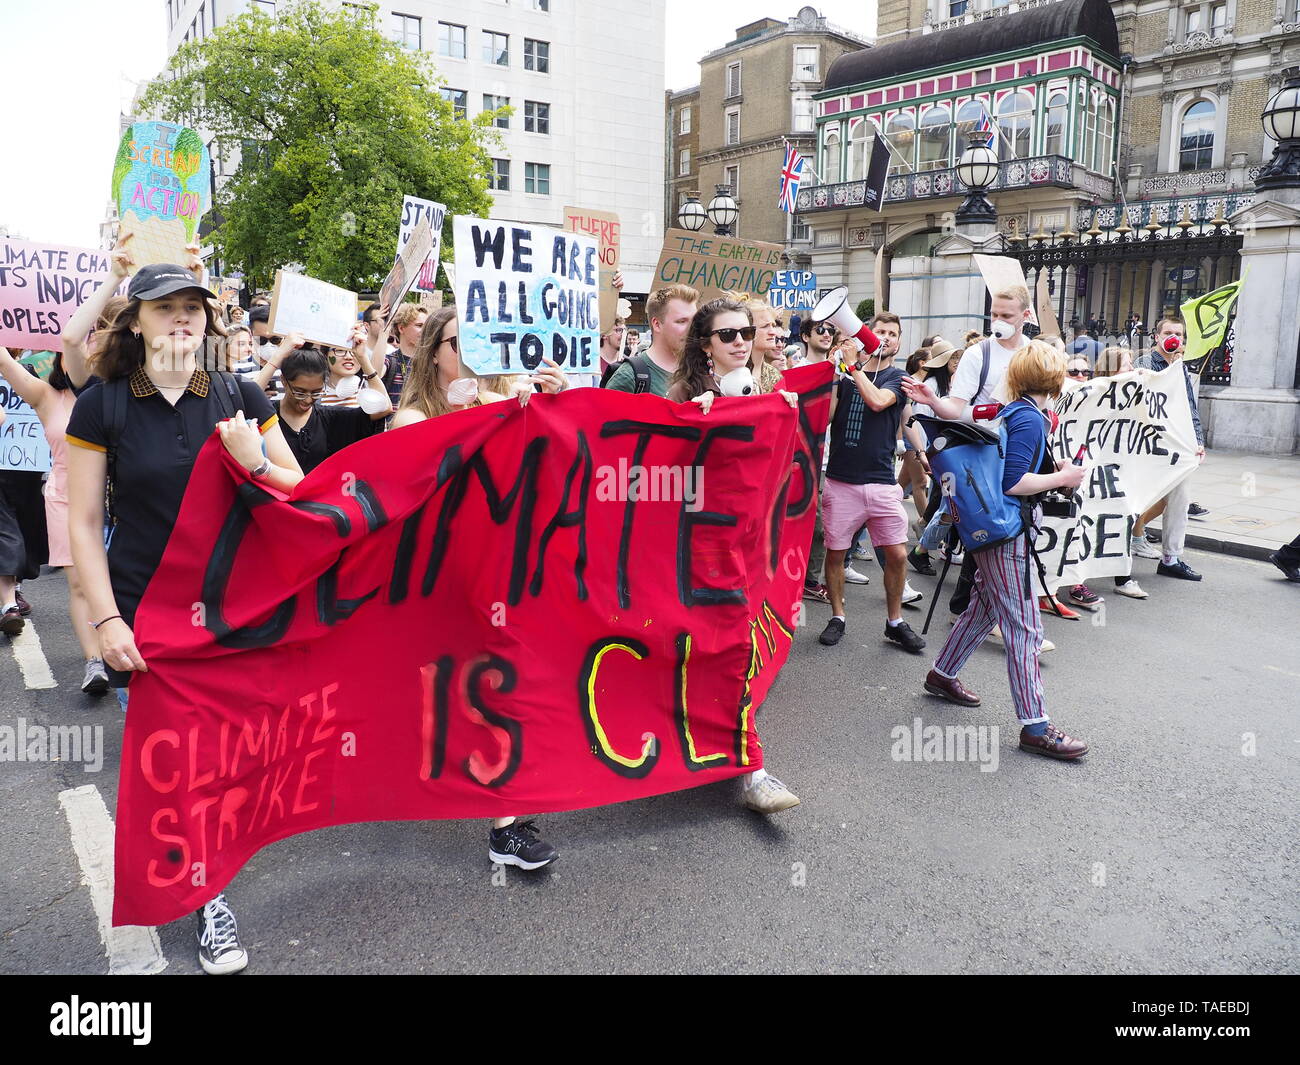 London, UK. 24th May, 2019. Students from Kings College London march for action on climate change along the Strand to meet up with the main protest event. Credit: Alan Gallery. Stock Photo